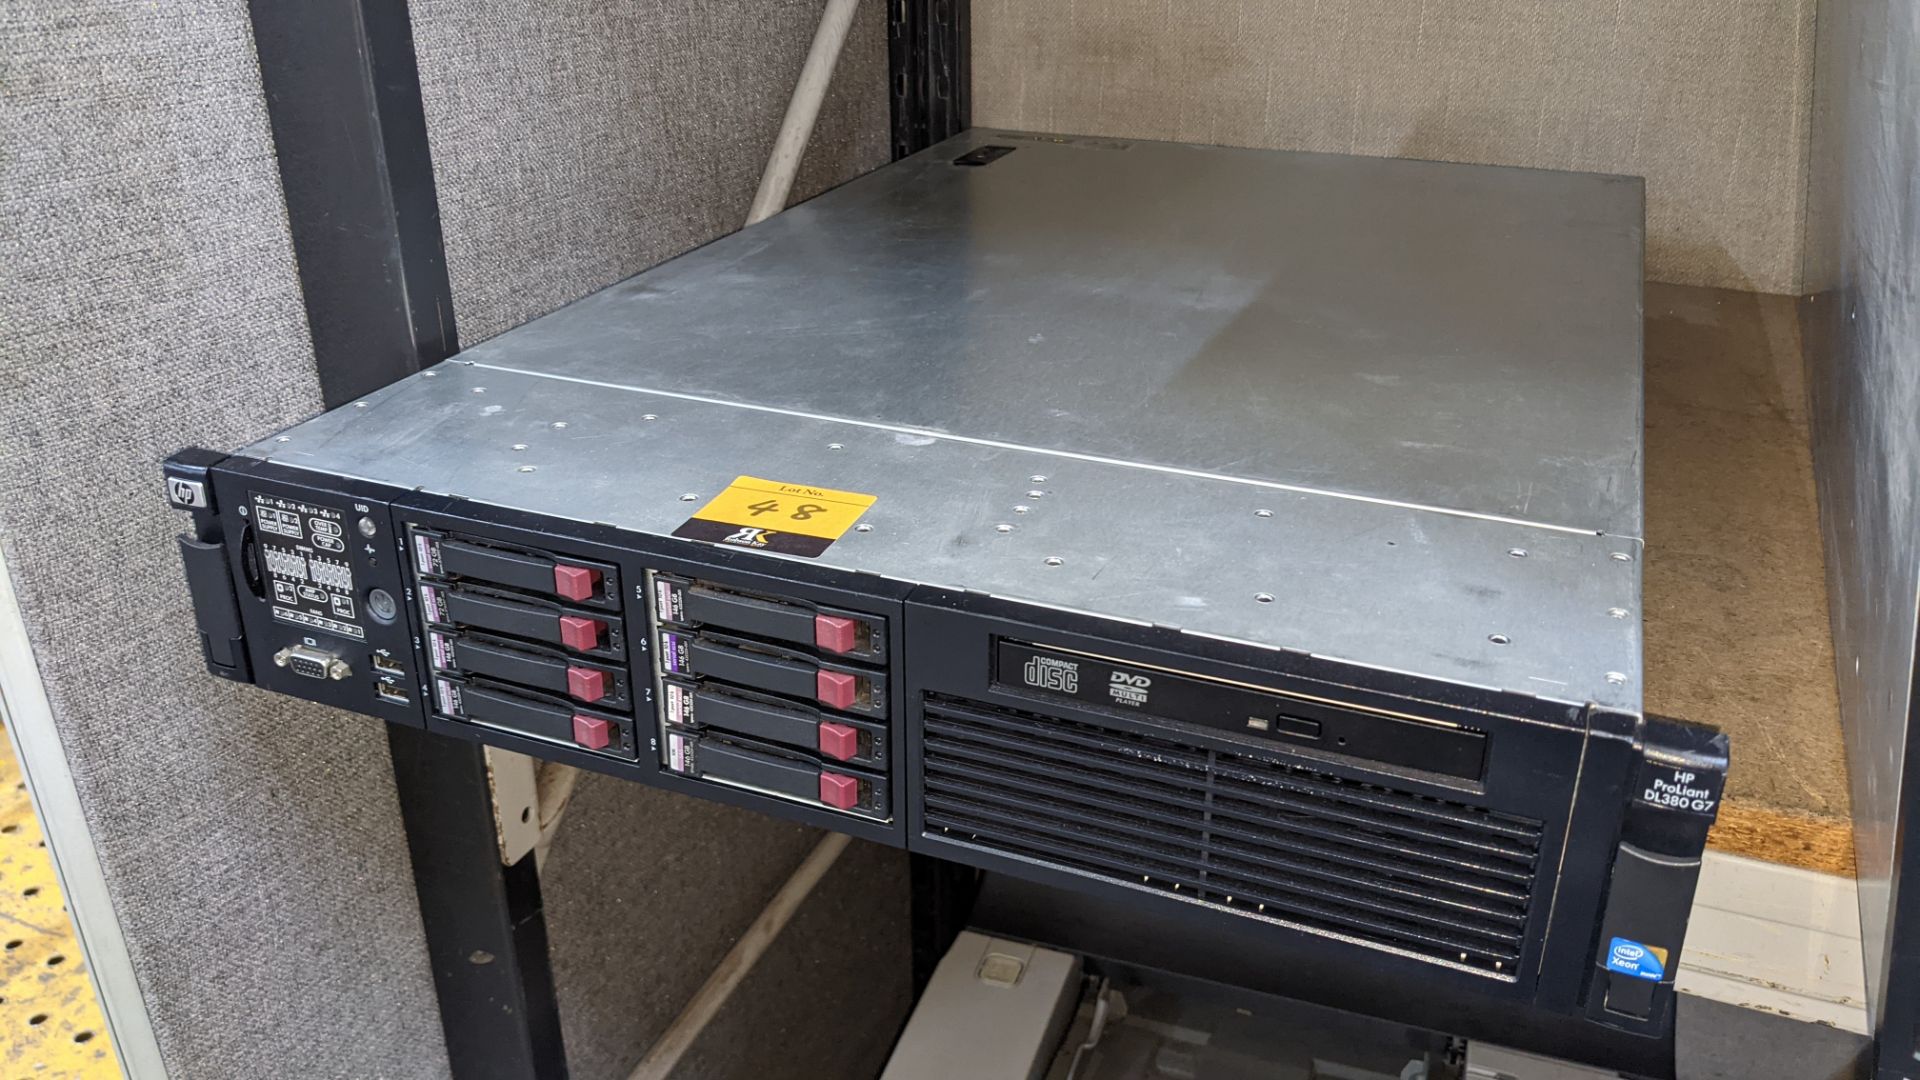 HP DL380 G7 rack mountable server with 2 off 72GB & 6 off 146GB 10K hard drives, 32GB RAM, 2 off Xeo - Image 3 of 10